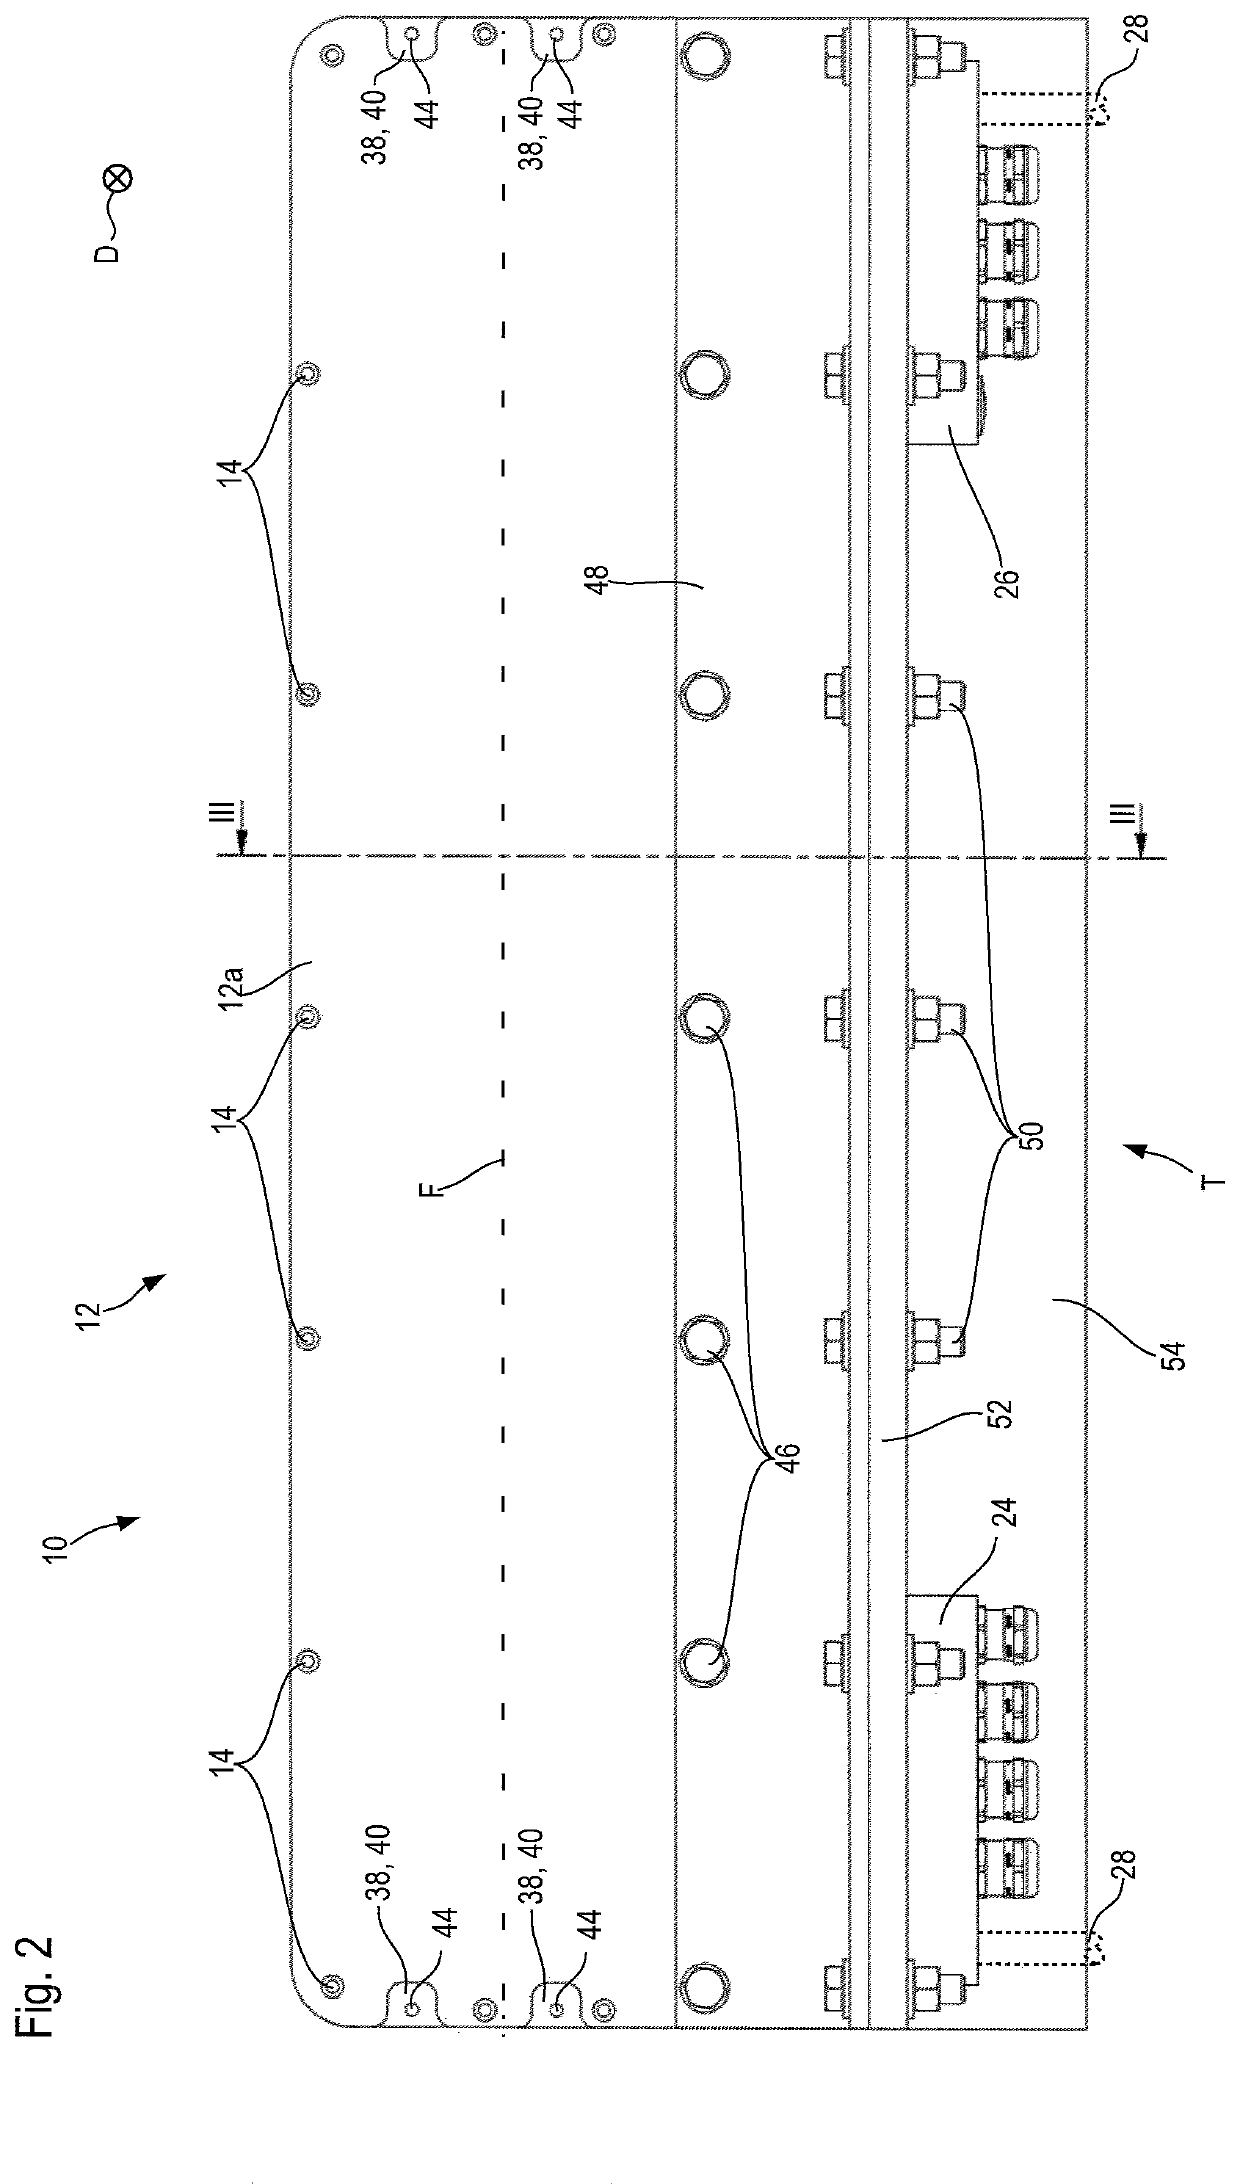 Winding arrangement for a linear motor with coil pairs arranged in parallel made from a continuous electrical conductor